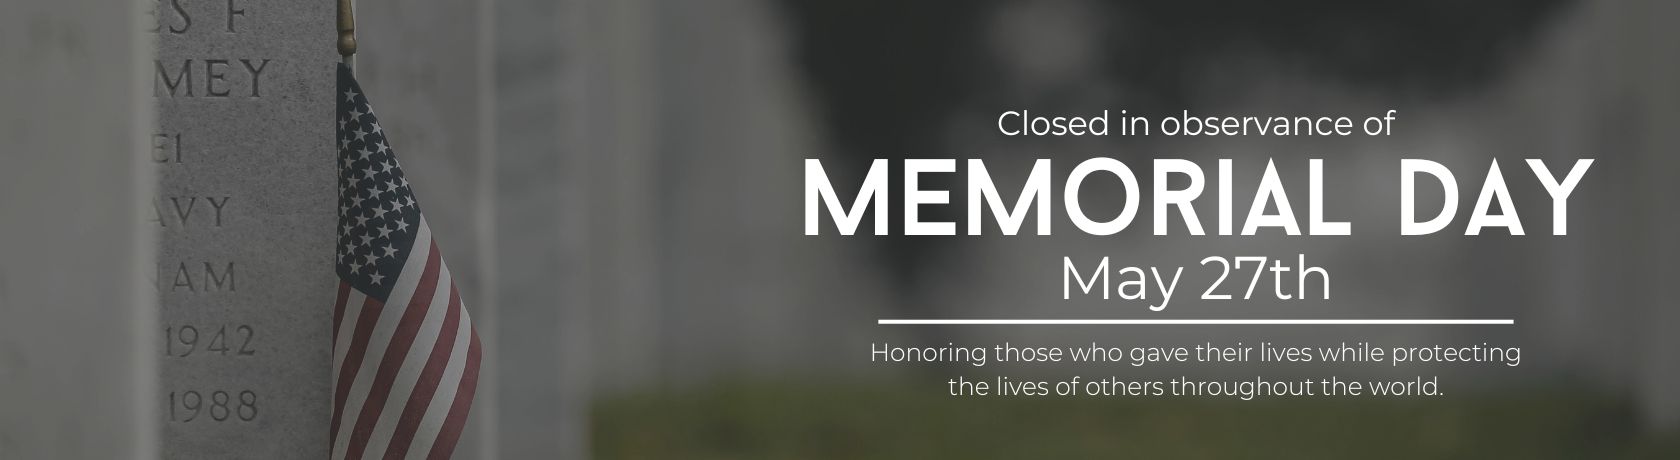 We will be closed in observance of Memorial Day on May 27th. Please visit us on the app or online.